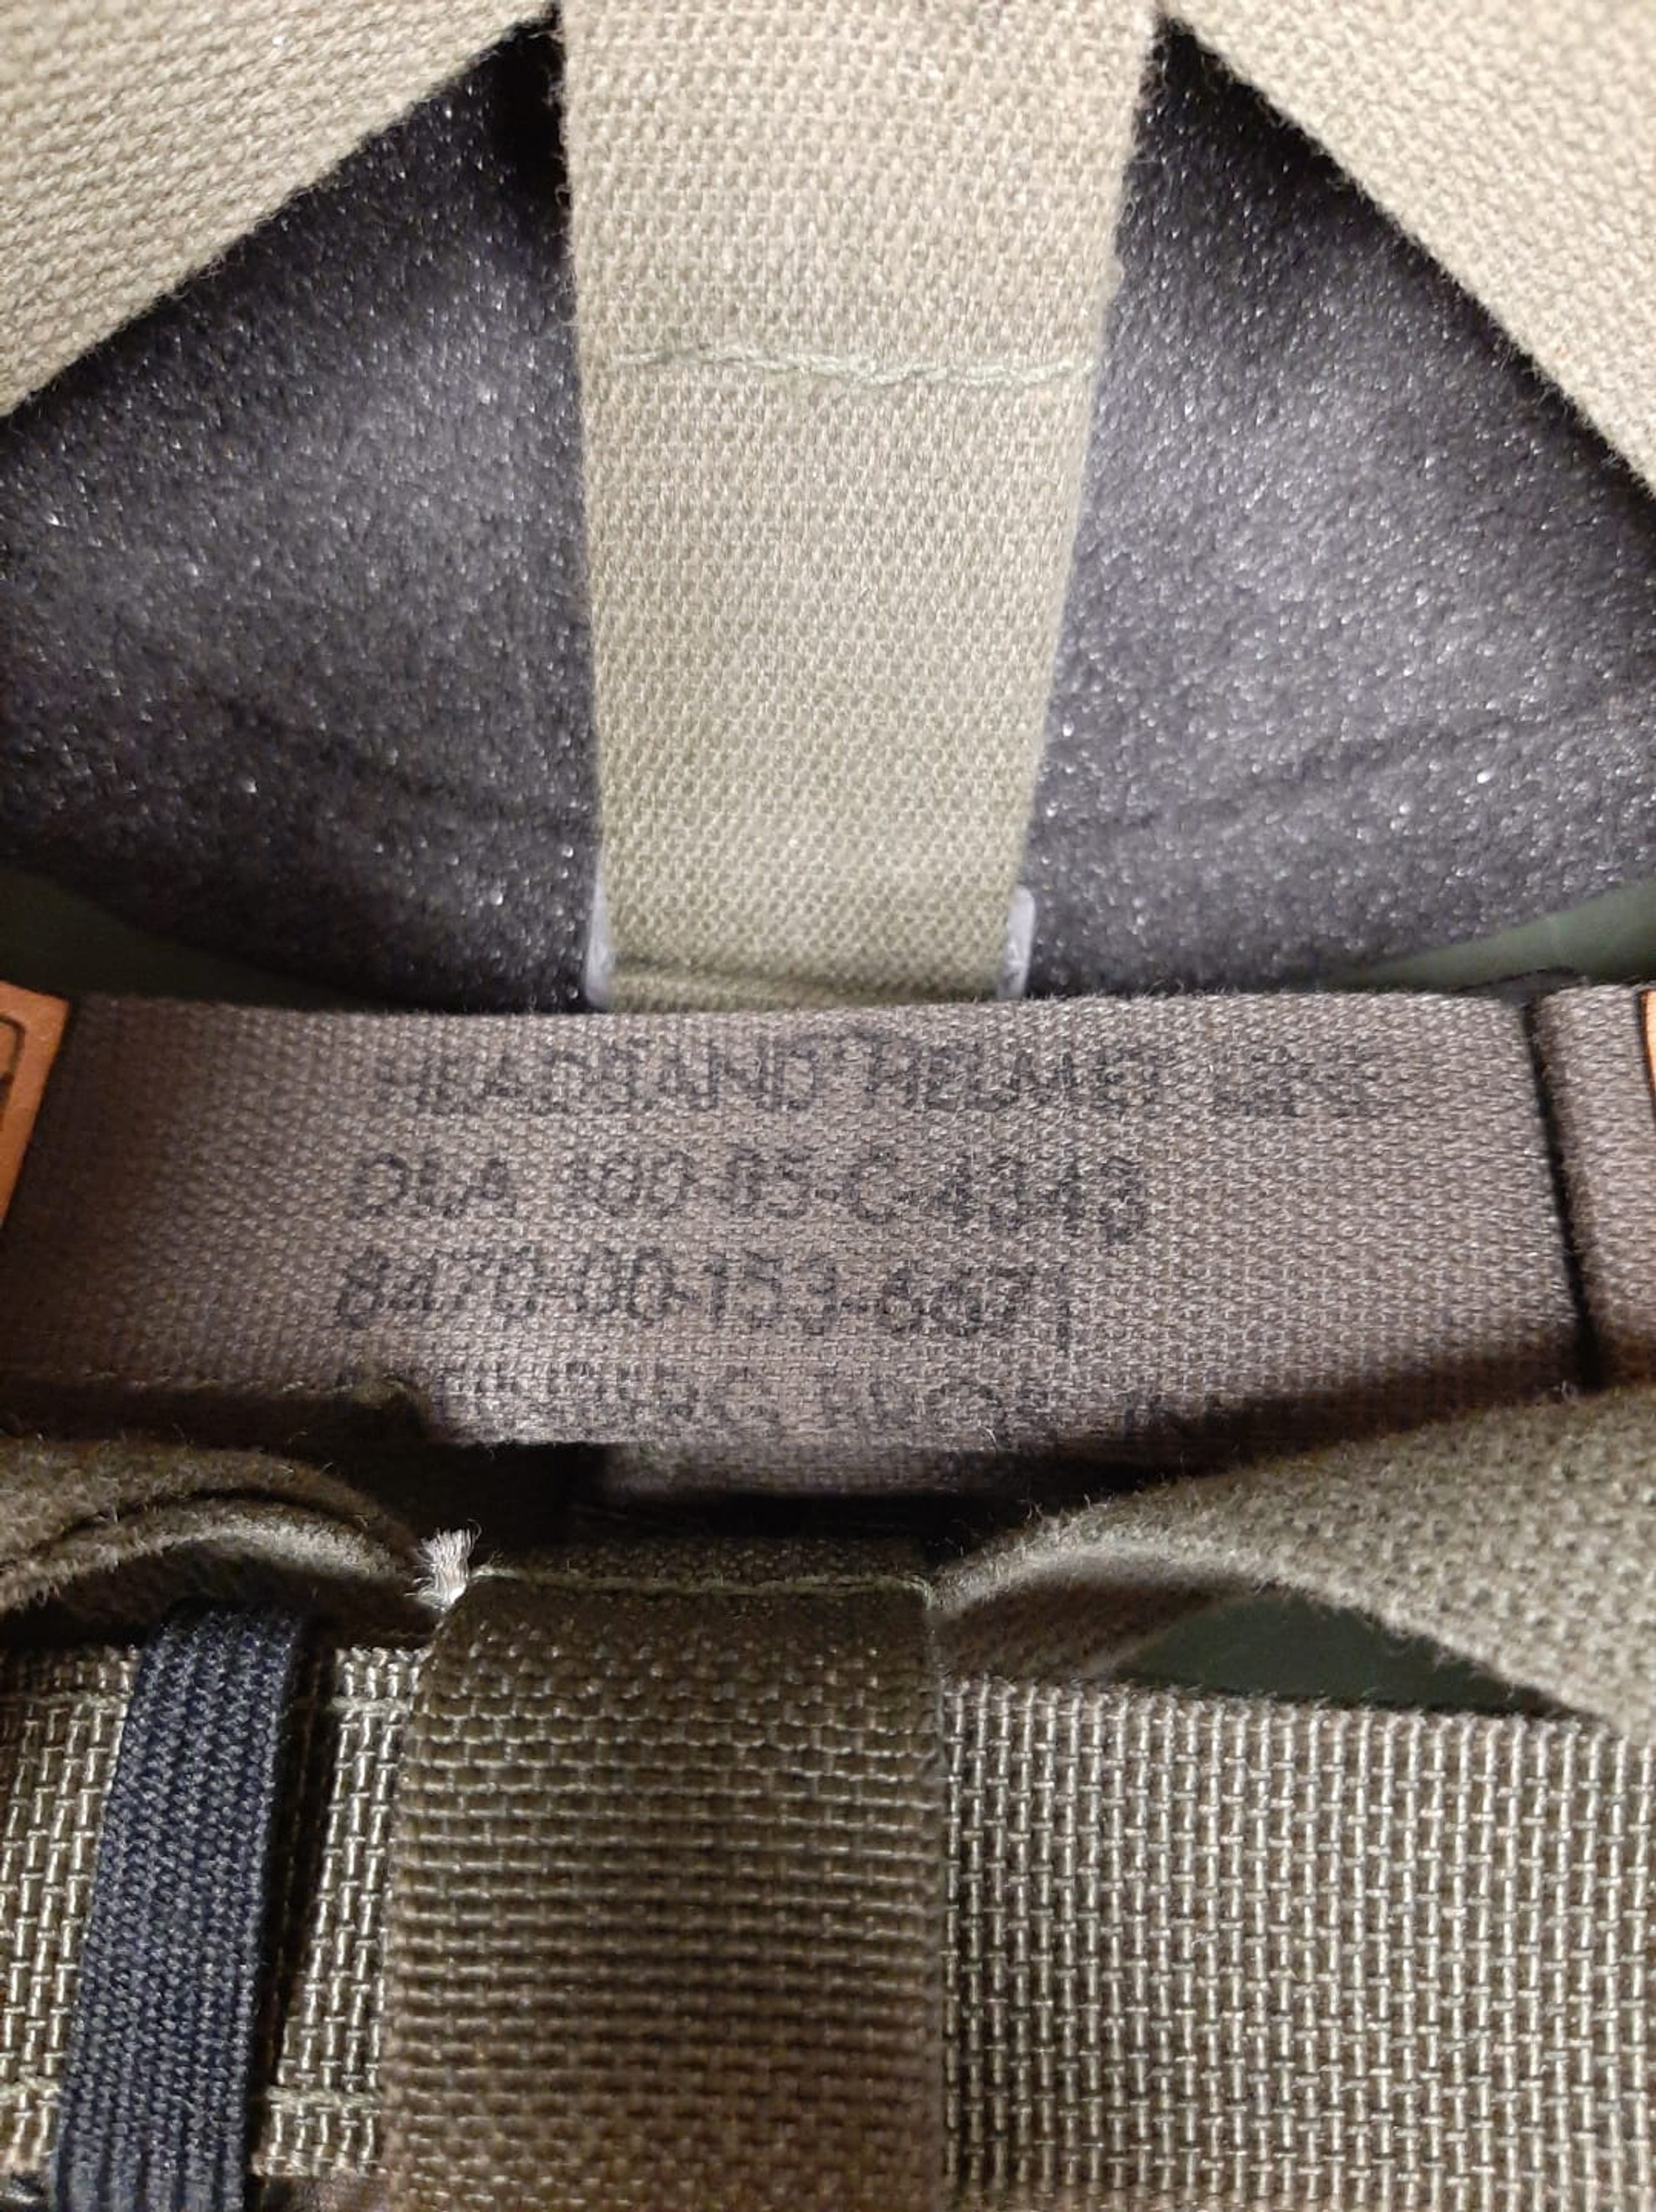 Canadian Armed Forces Prototype Barrday P2 Helmet - Hero Outdoors